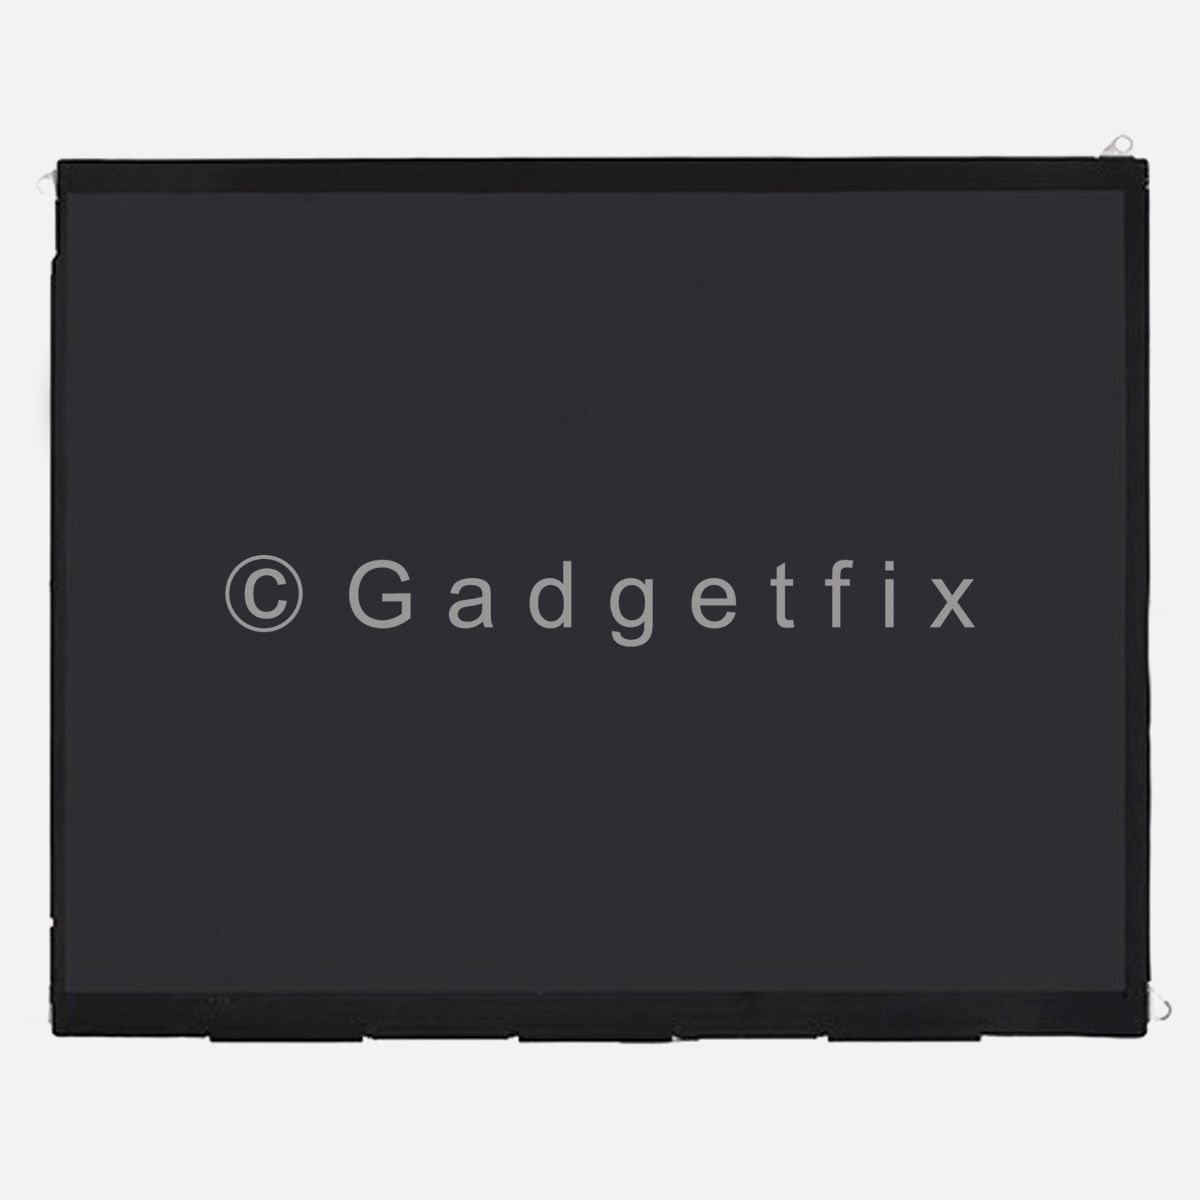 LCD Screen Display Replacement Parts For Ipad 4 4th Gen Generation